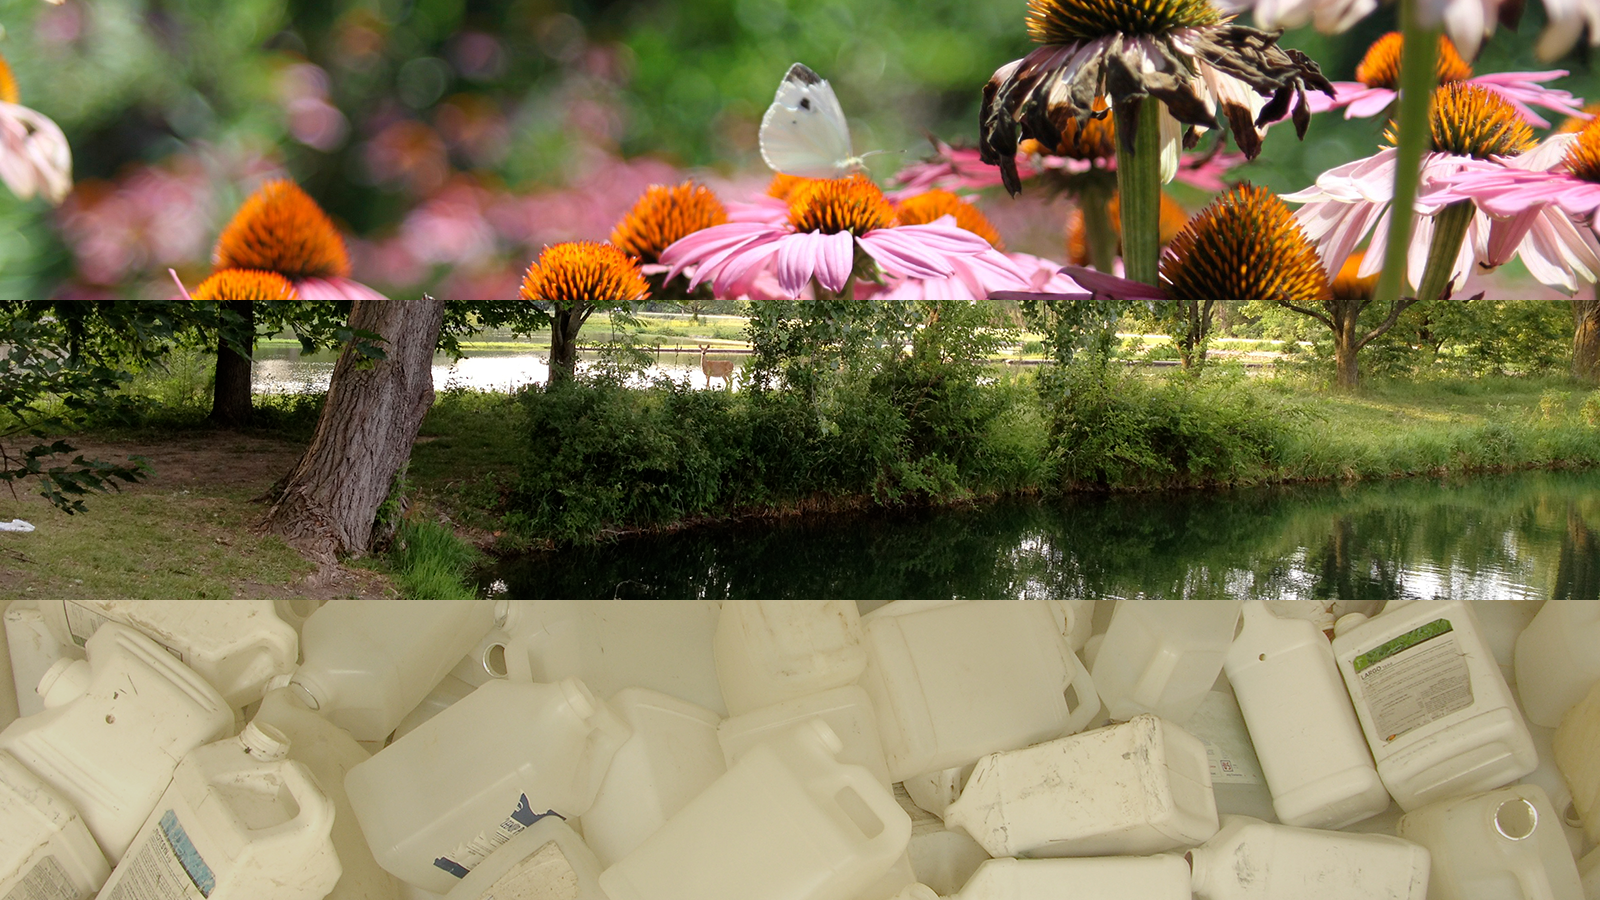 Photo collage: butterfly on a flower, deer near a pond, pesticide containers for recycling